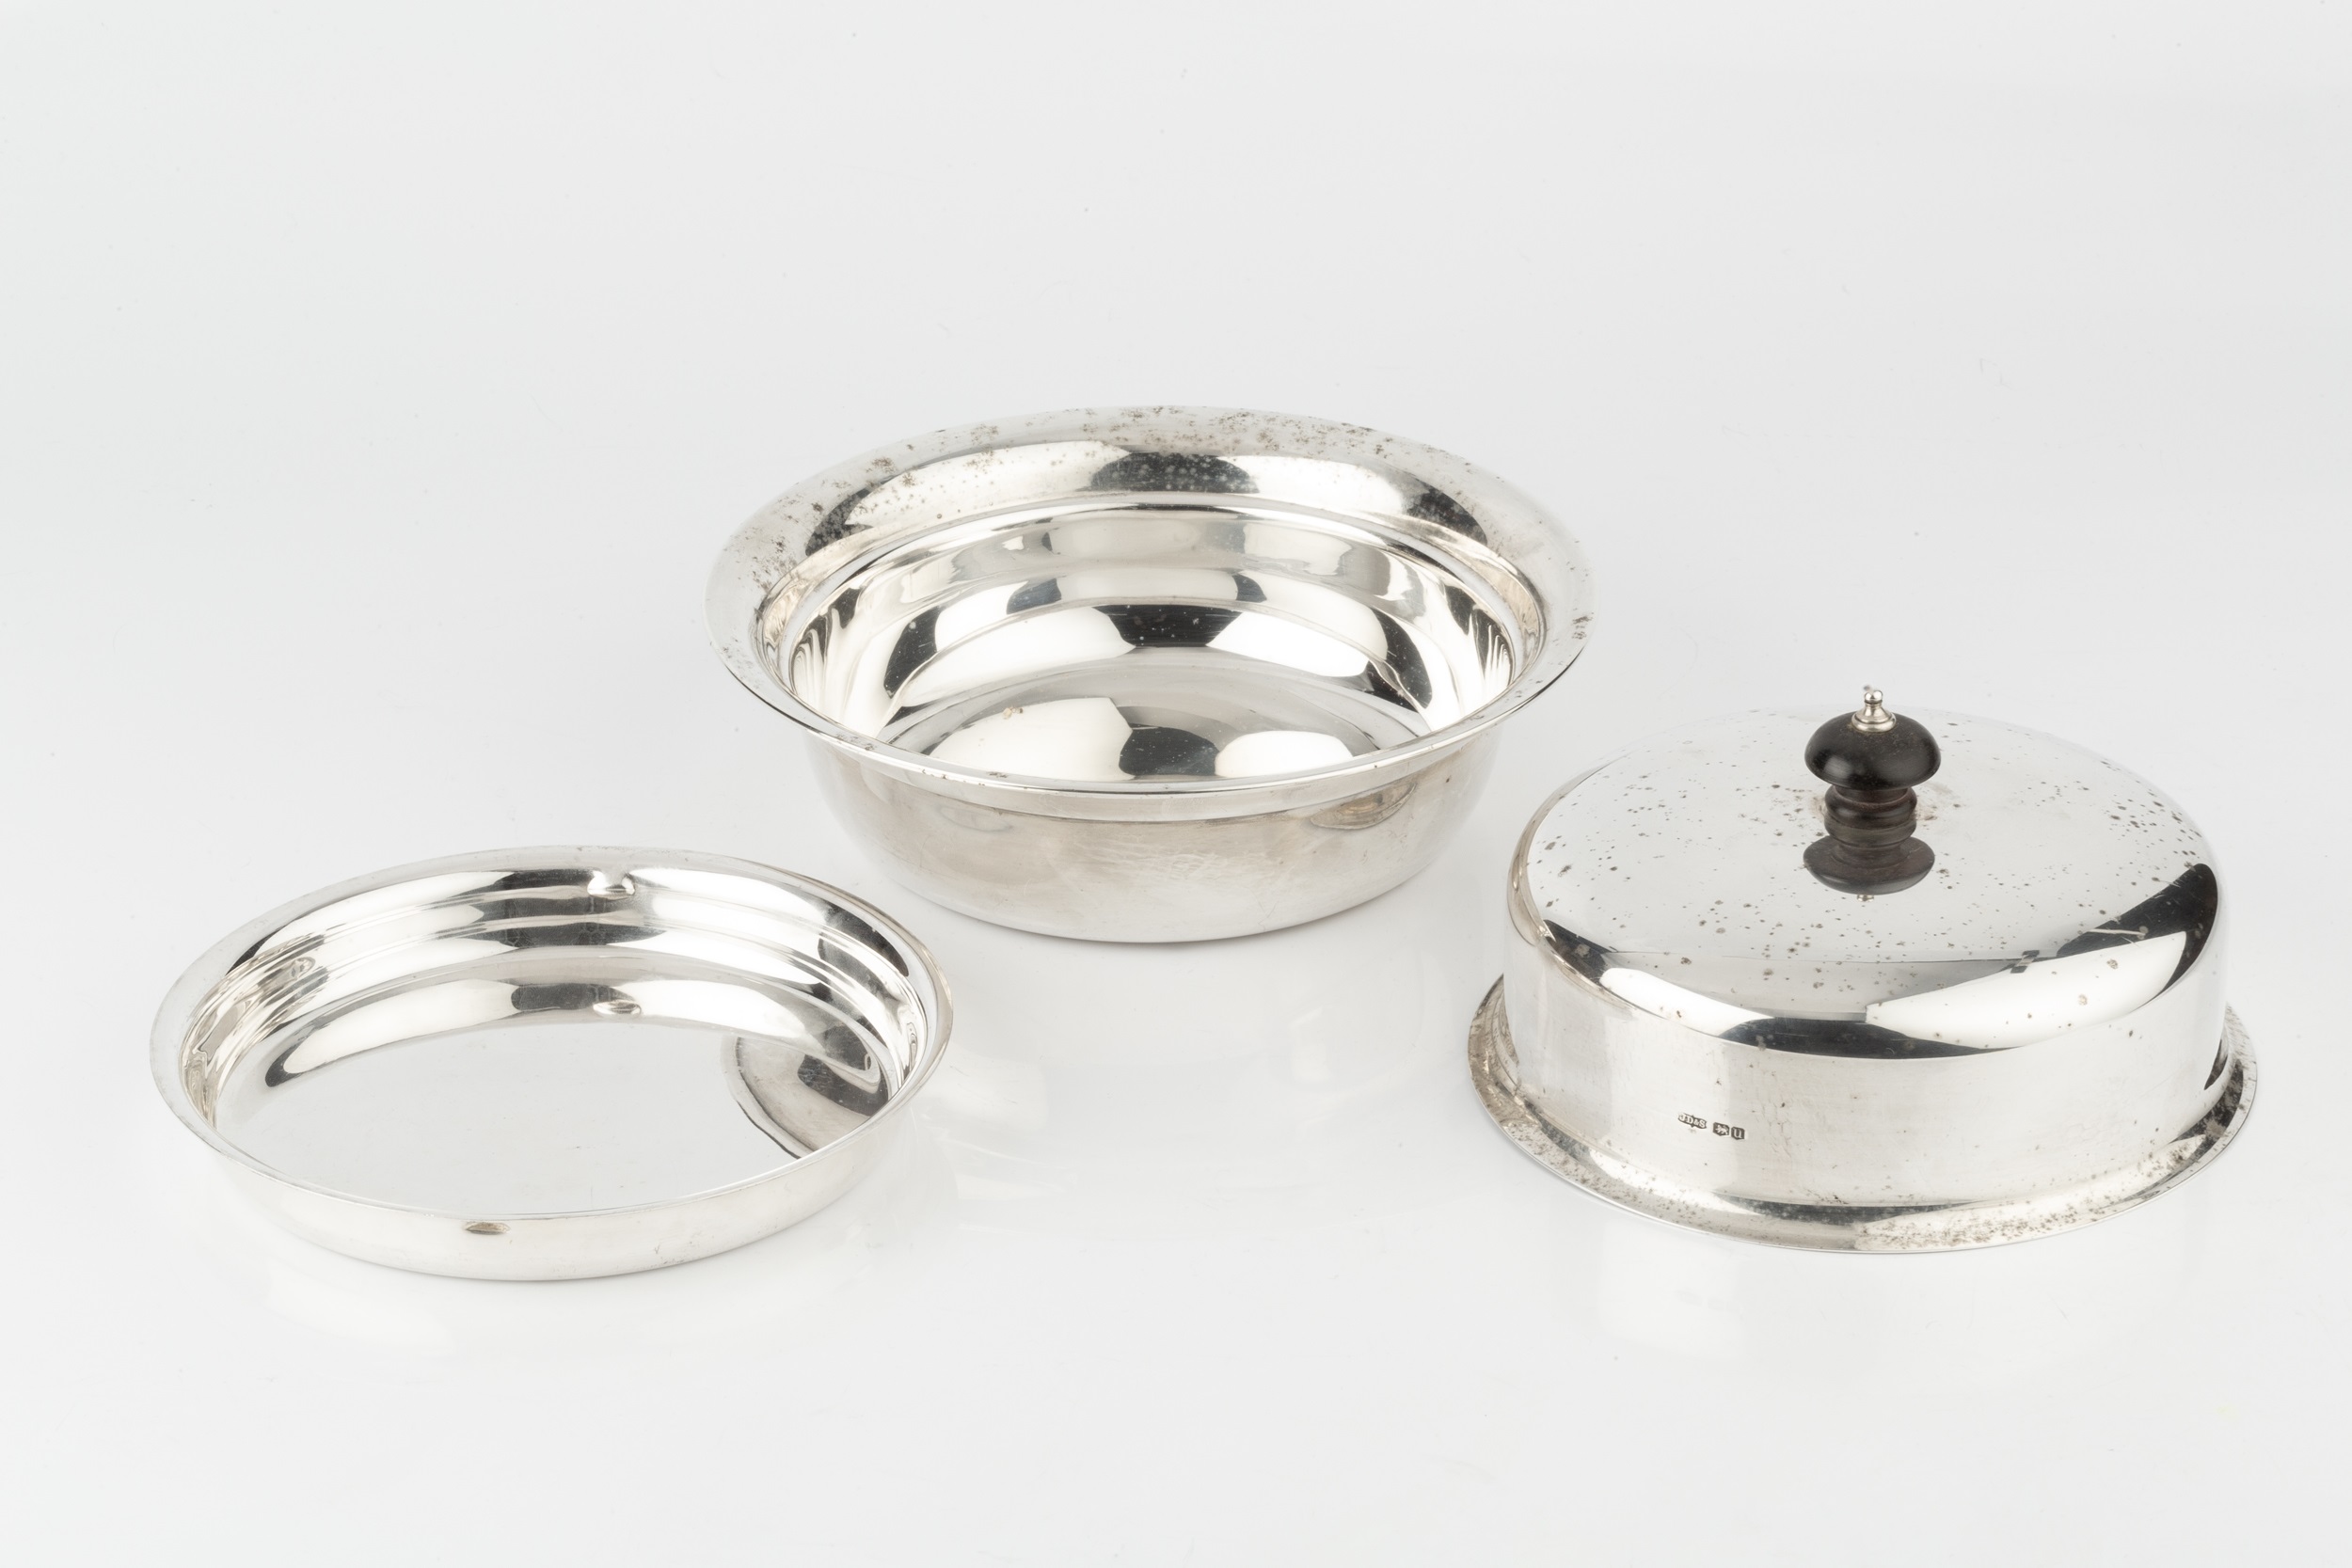 A George VI silver muffin dish and cover, with liner, the cover with ebonised finial by James - Image 2 of 2